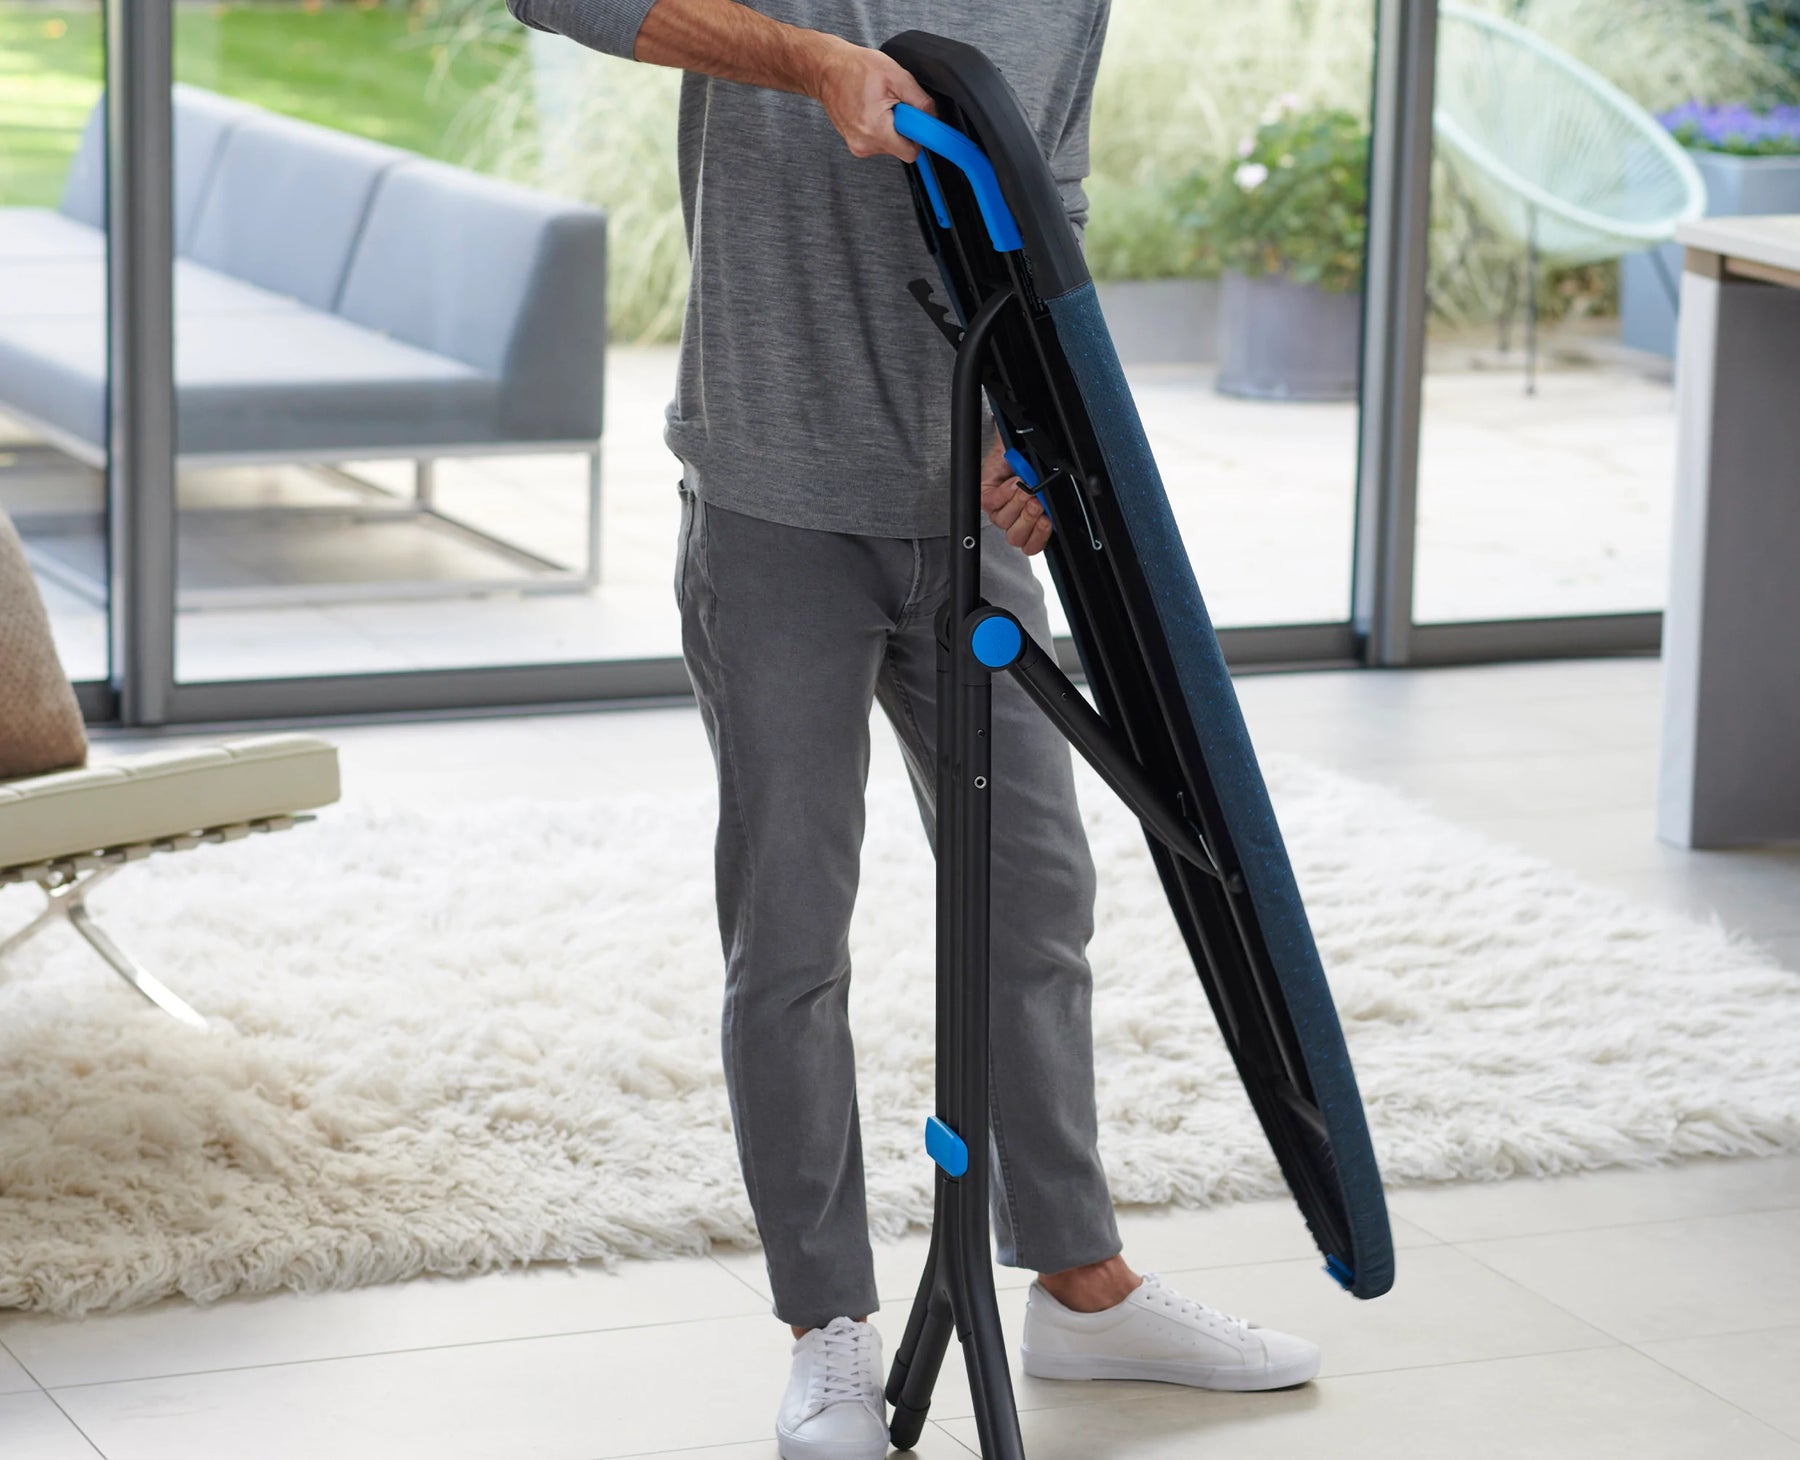 Glide Plus Easy-store Ironing Board - Image 4